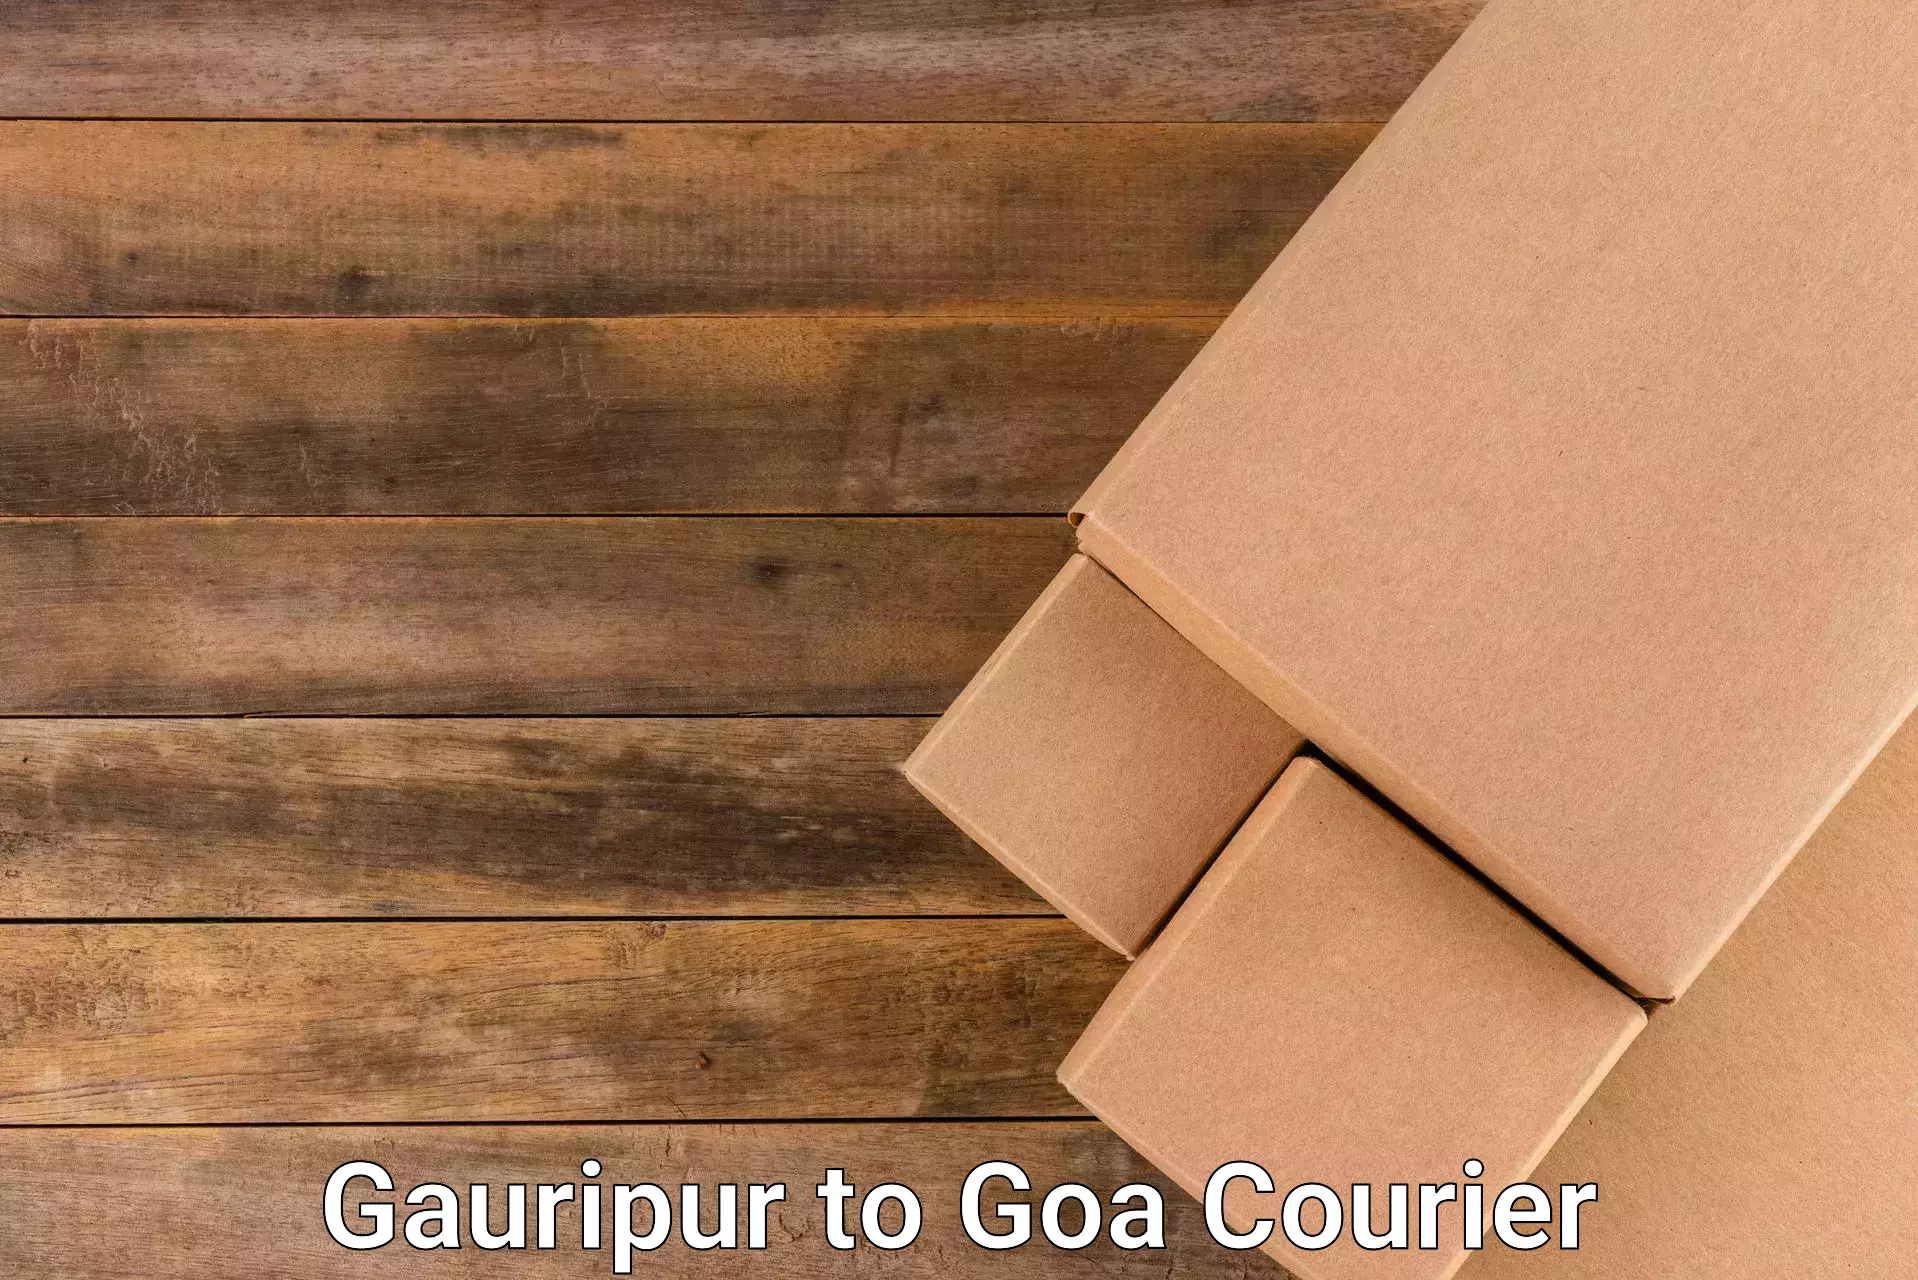 Global shipping solutions Gauripur to South Goa